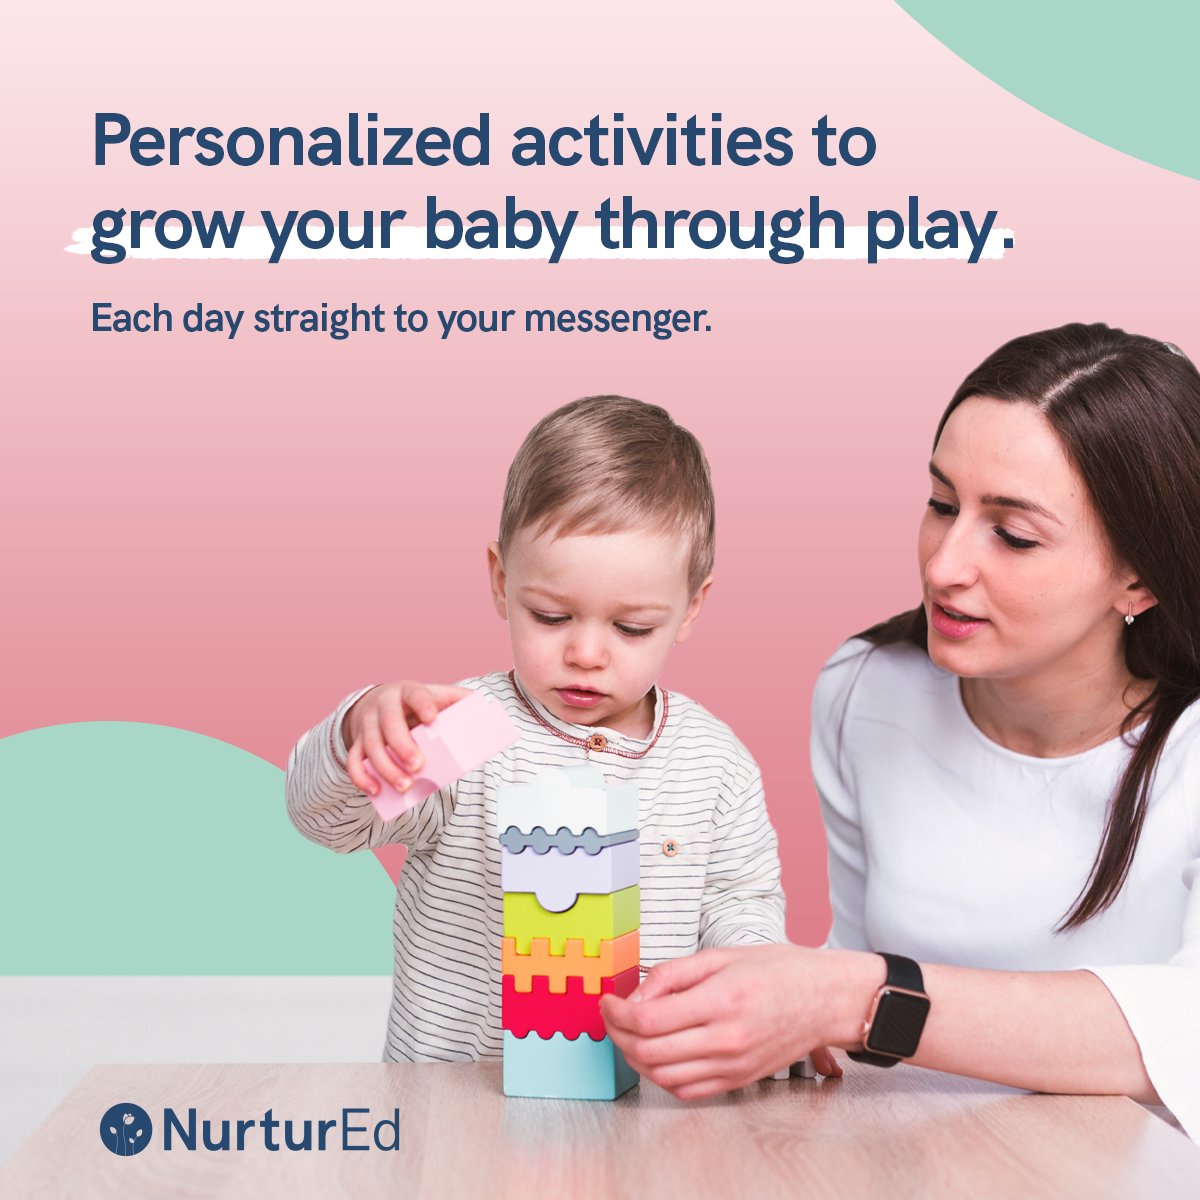 You’re a new mom? We got your back! ❤️

Get activities every day to help build and strengthen your baby skills. All activities are age-appropriate, science-based and designed to be playful and fun!

#newmom #parenting #toddlerdevelopment